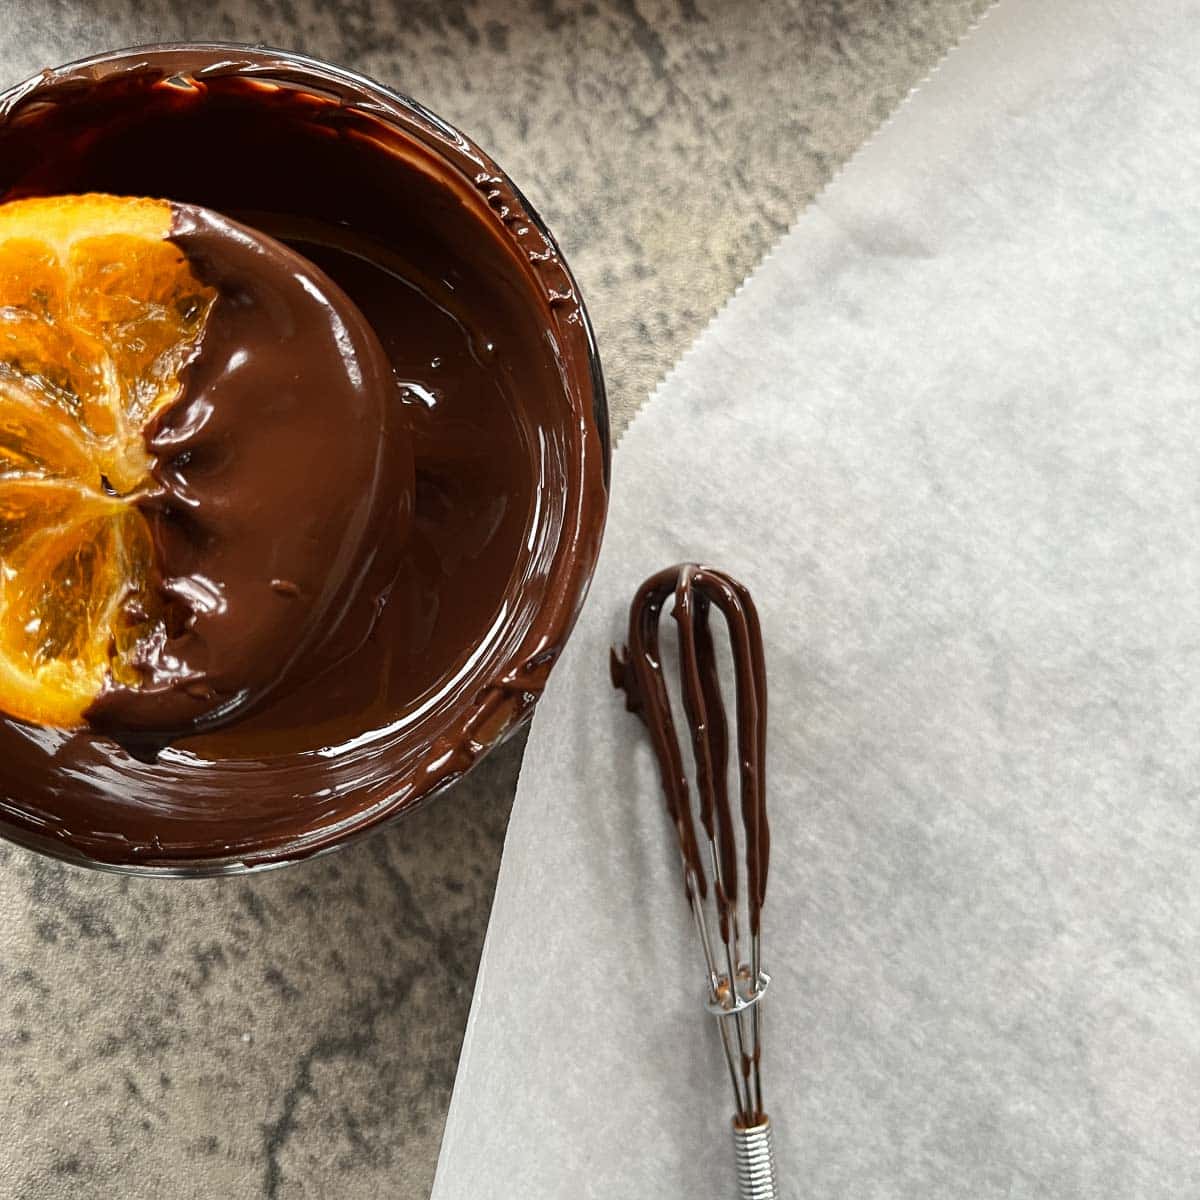 dipping orange slices into melted dark chocolate